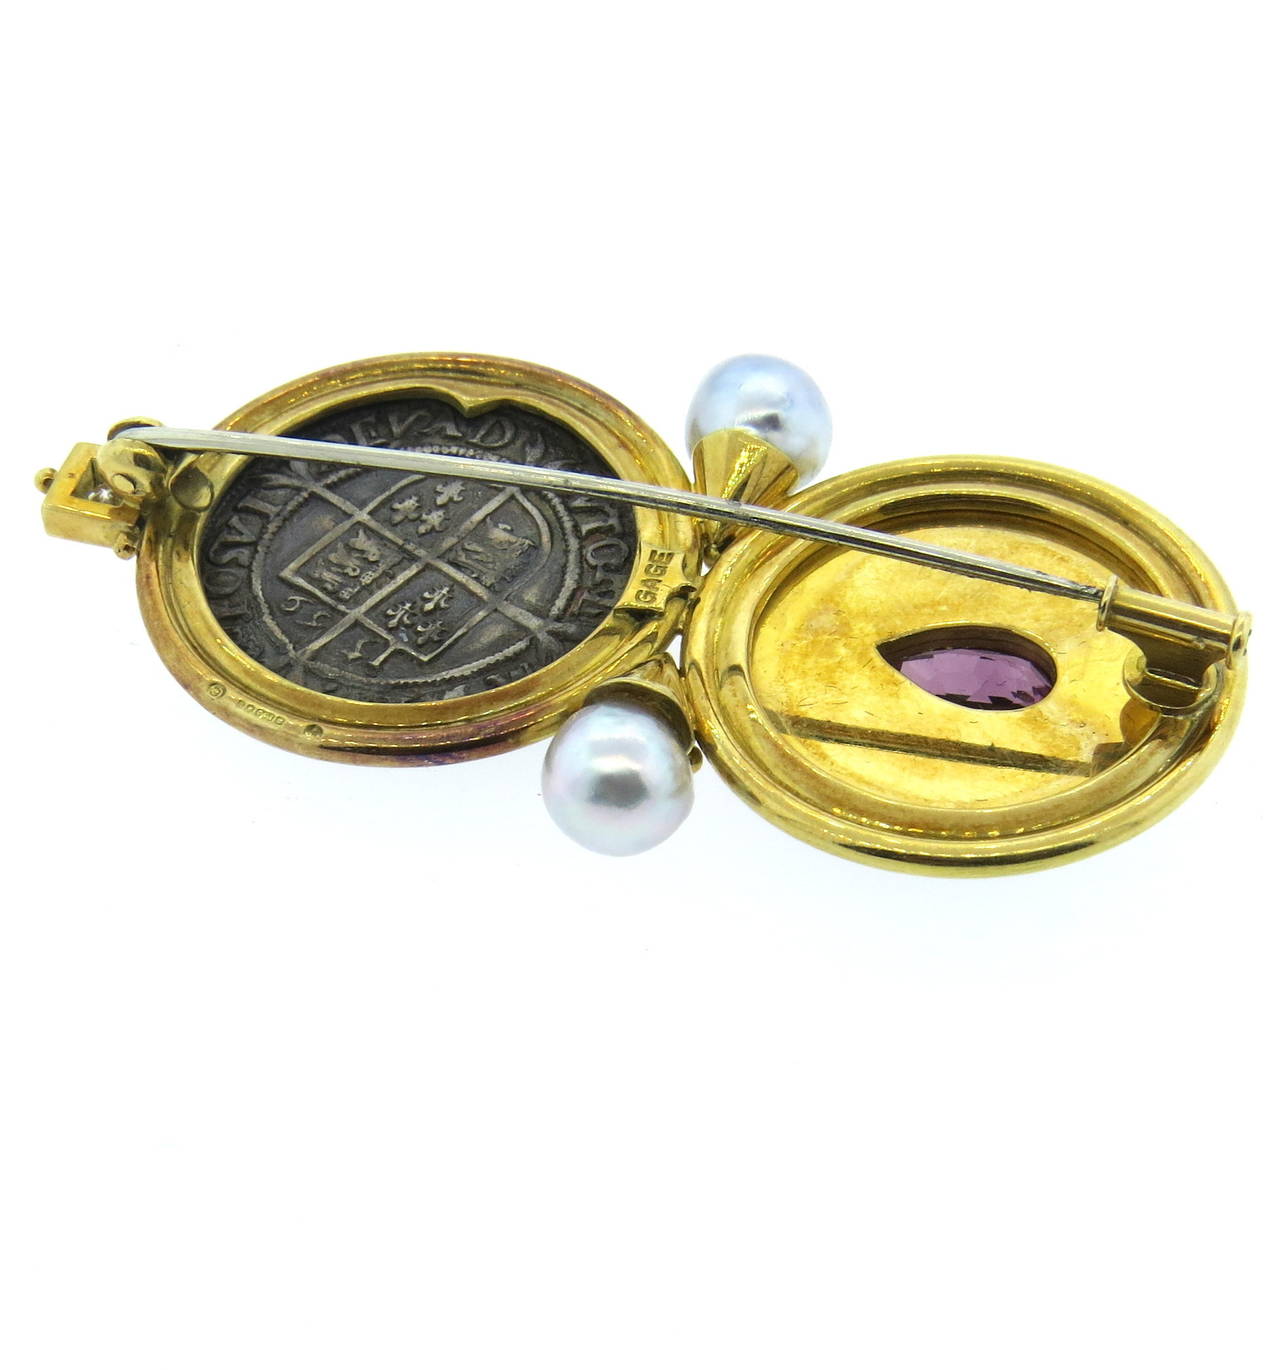 Elizabeth Gage 18k gold brooch pin, with 23mm a coin (Elizabeth 1st 1558-1603 Silver Sixpence (Dated 1569)), pear shape faceted rhodolite garnet, two pearls and diamond.  Brooch is 66mm x 35mm. Marked with English gold marks and Gage. weight of the